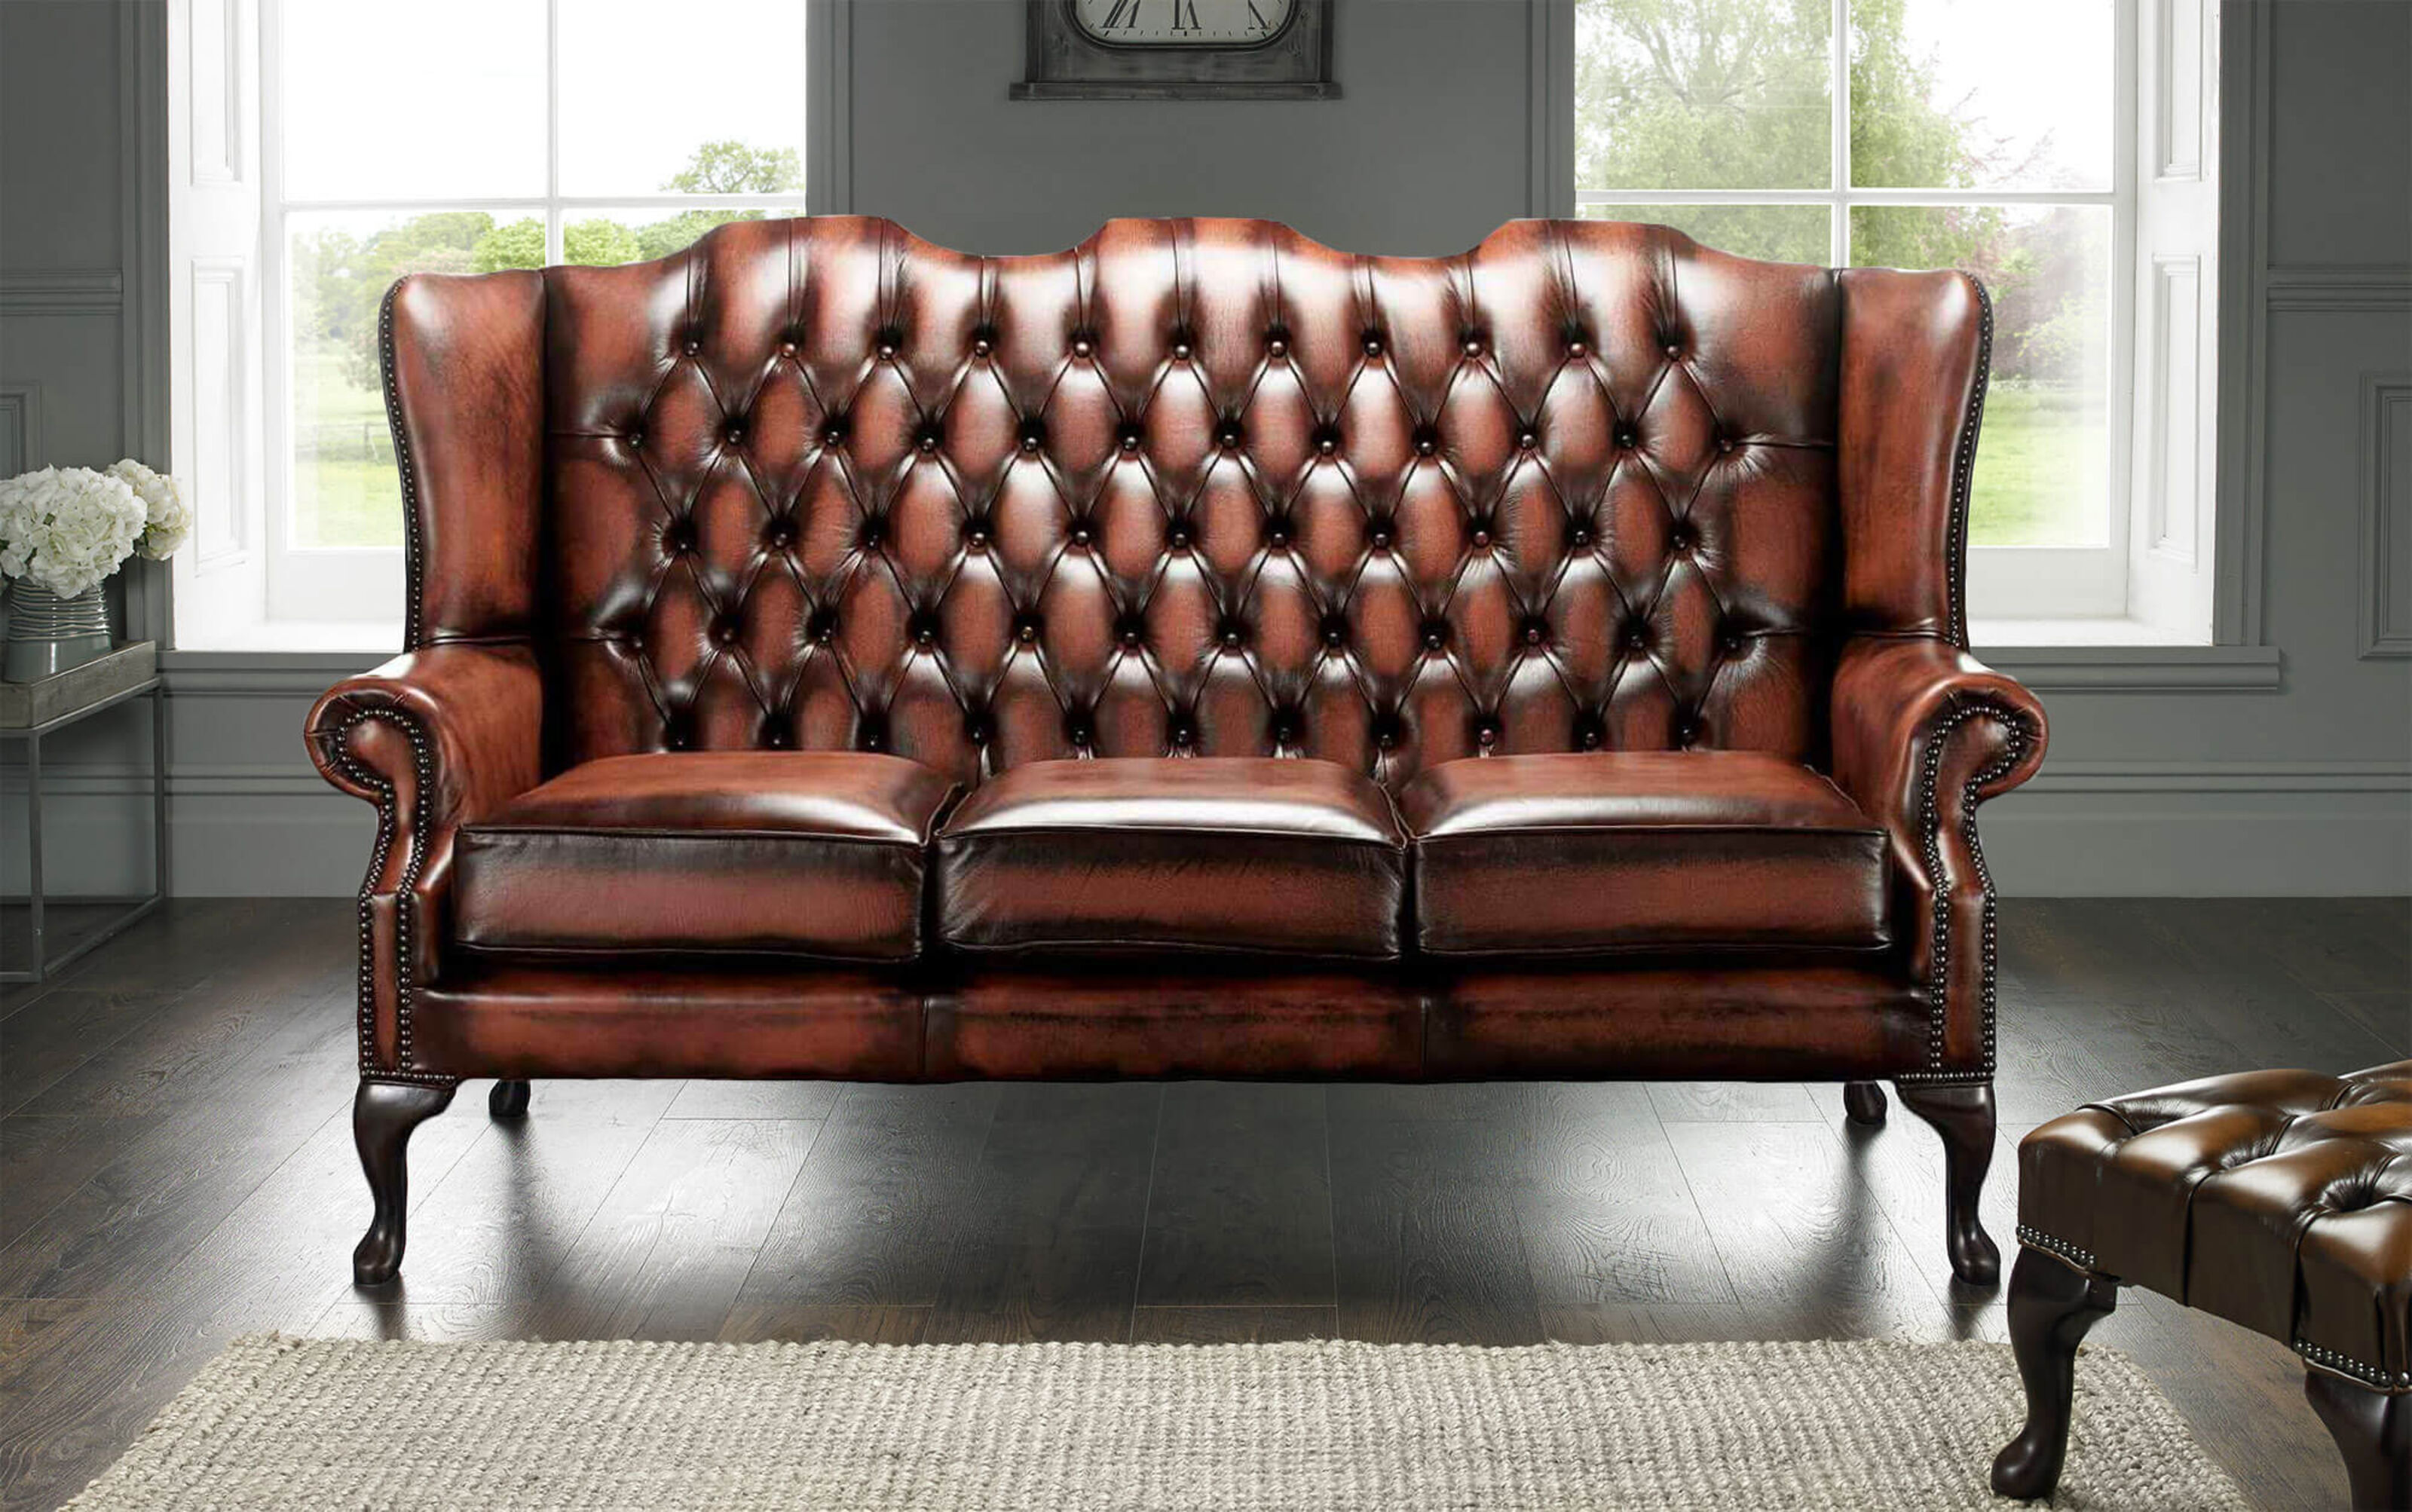 Elevated Elegance: Chesterfield Sofas with Tall Backrest Options  %Post Title